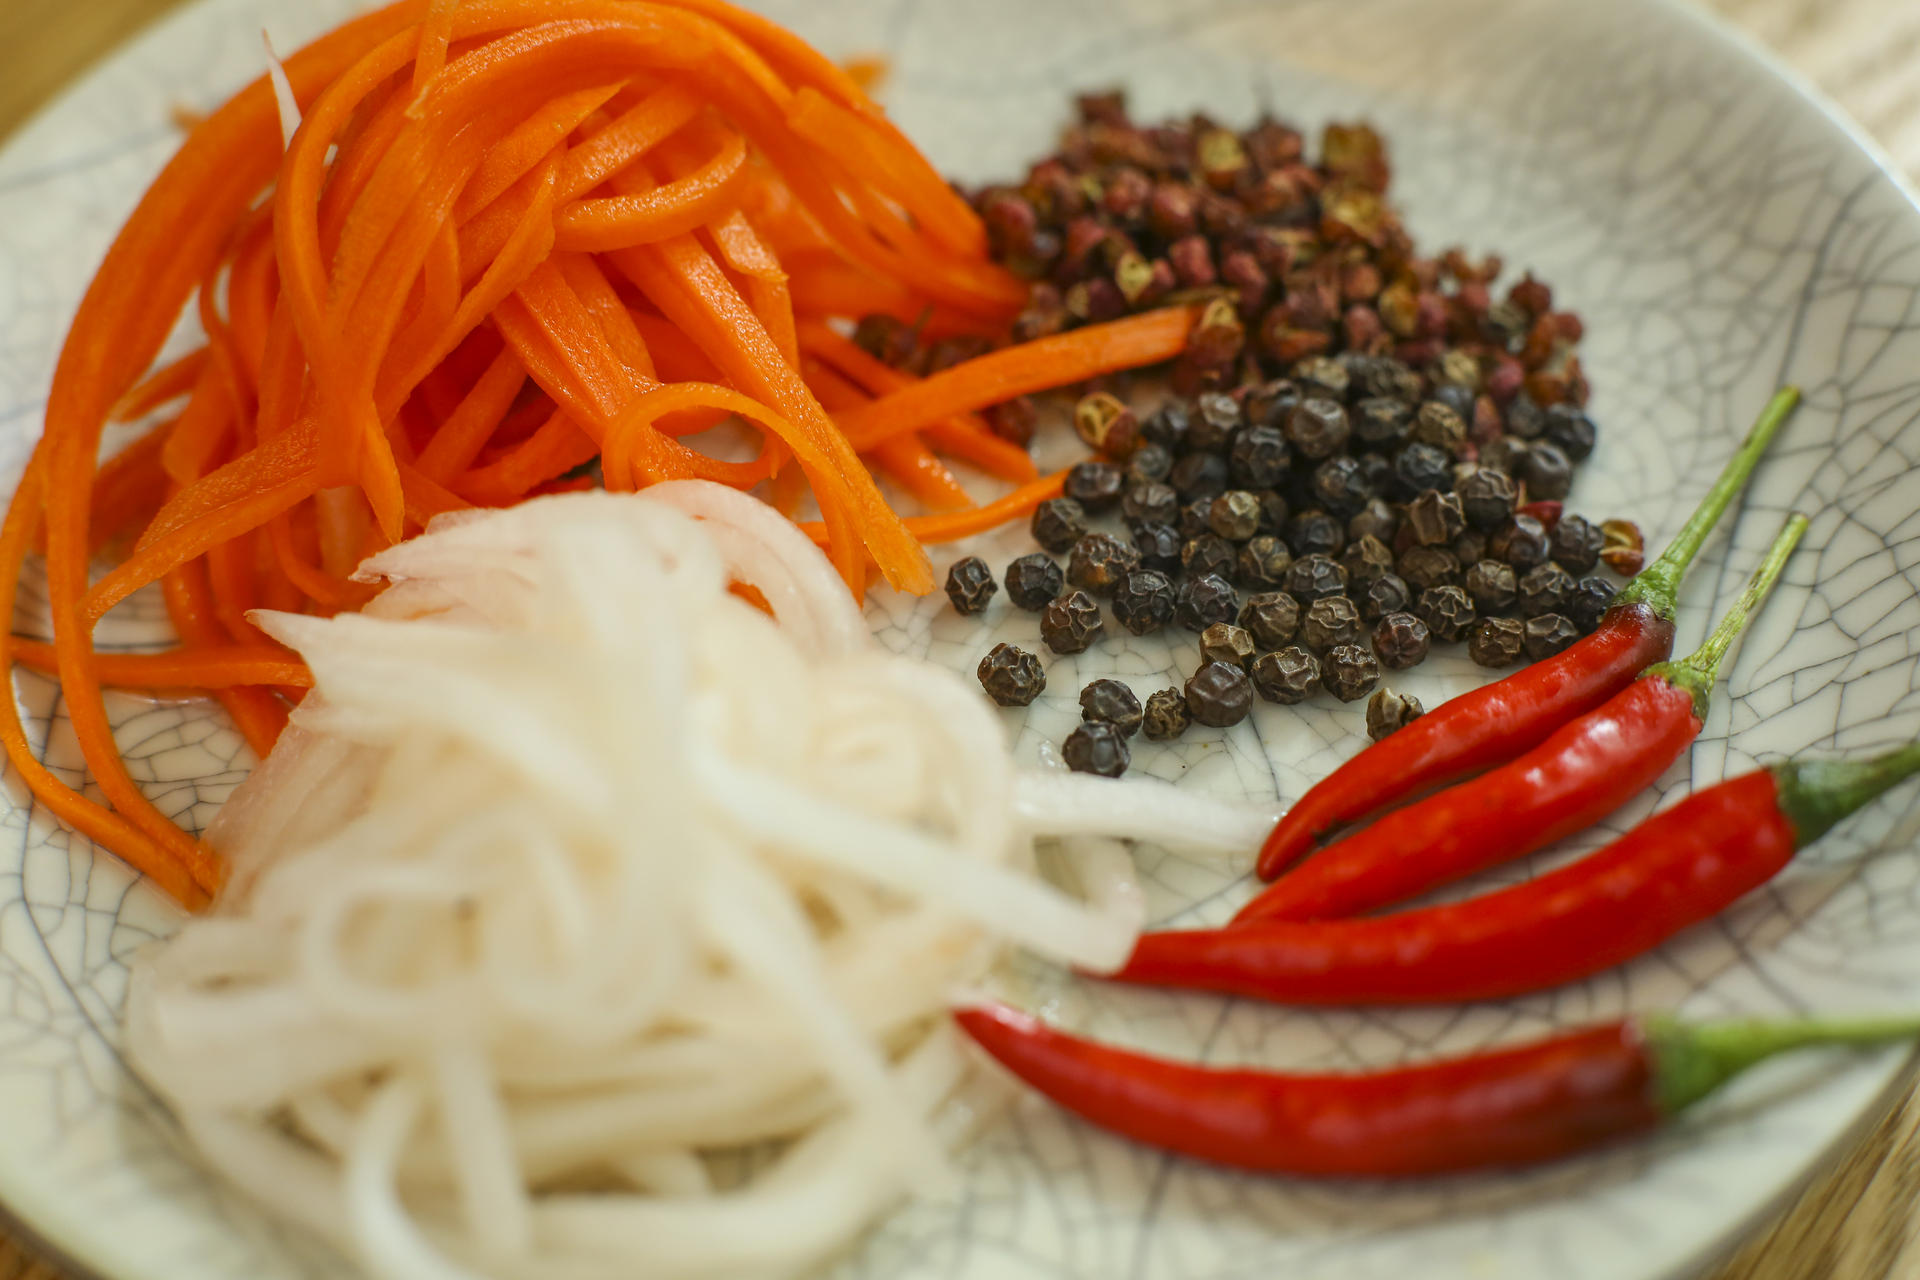 Ingredients for the daikon carrot side dish at Viet Kitchen. Photos: Edmond So